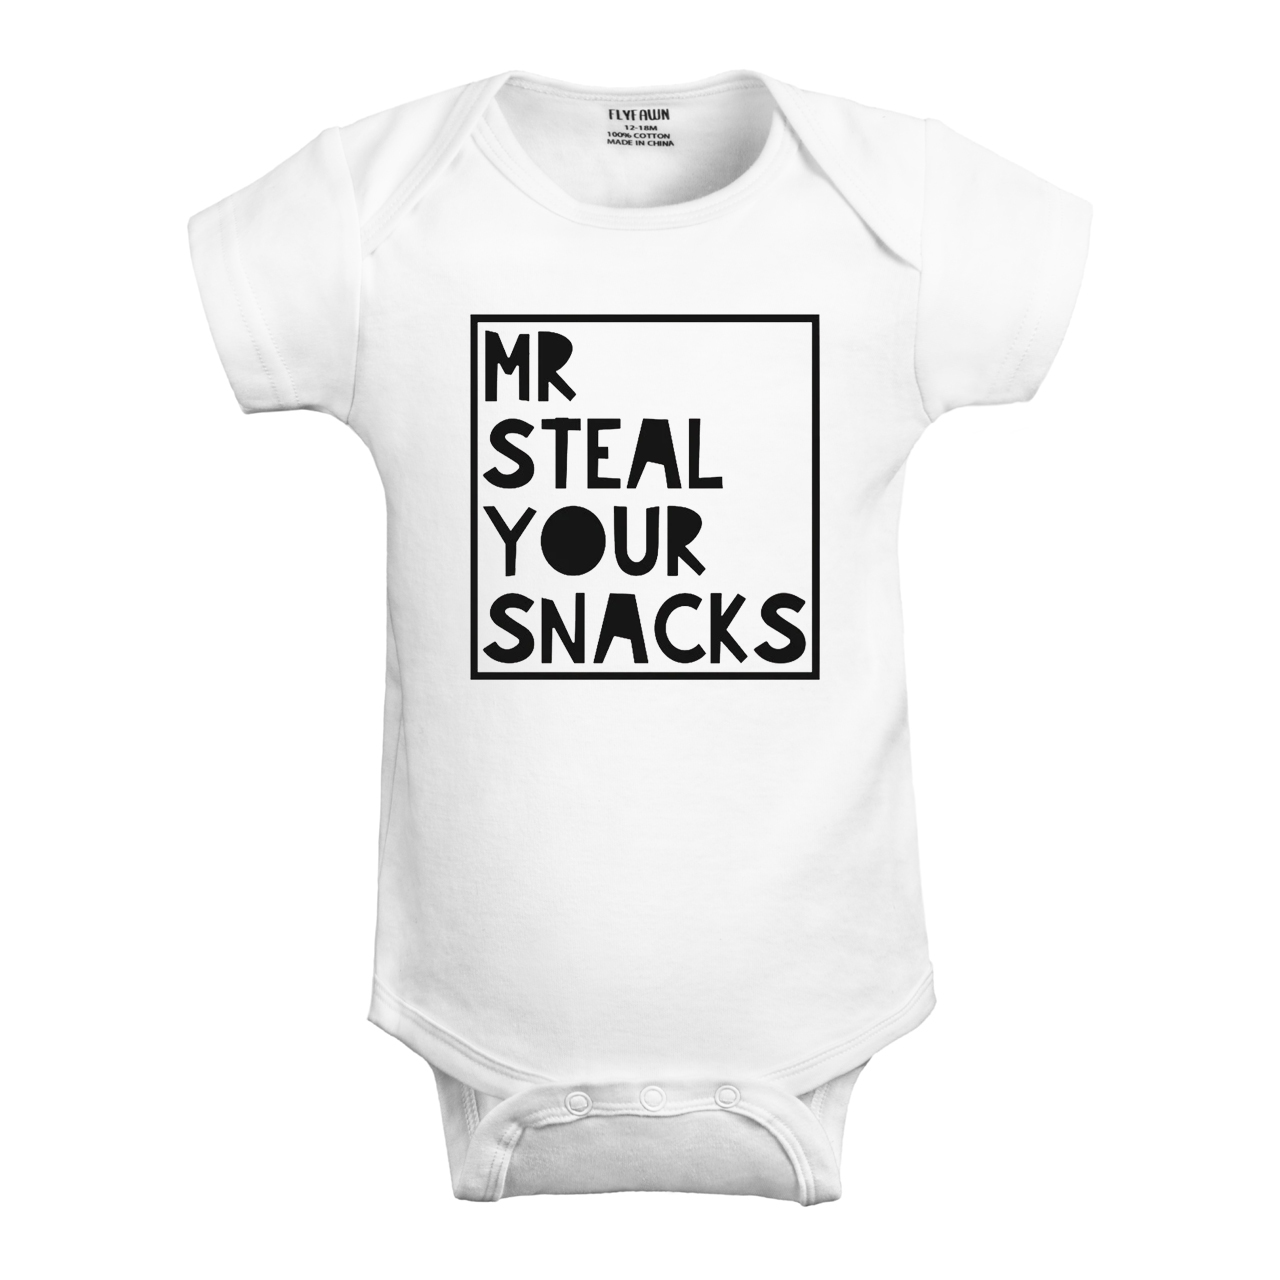 Mr Steal Your Snacks,Baby Bodysuit